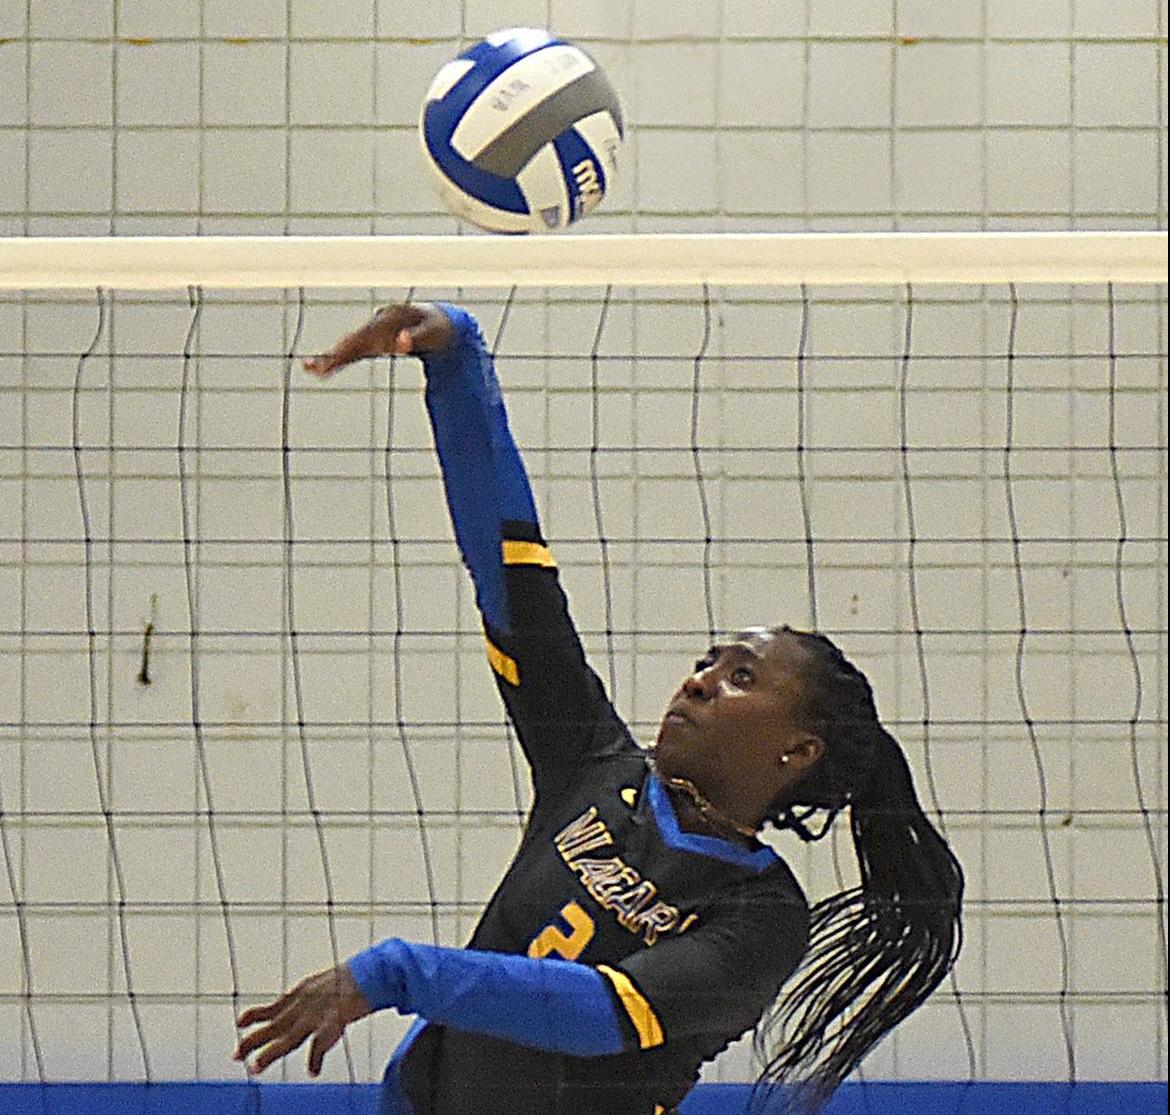 NCCC falls in straight sets to rival Kats